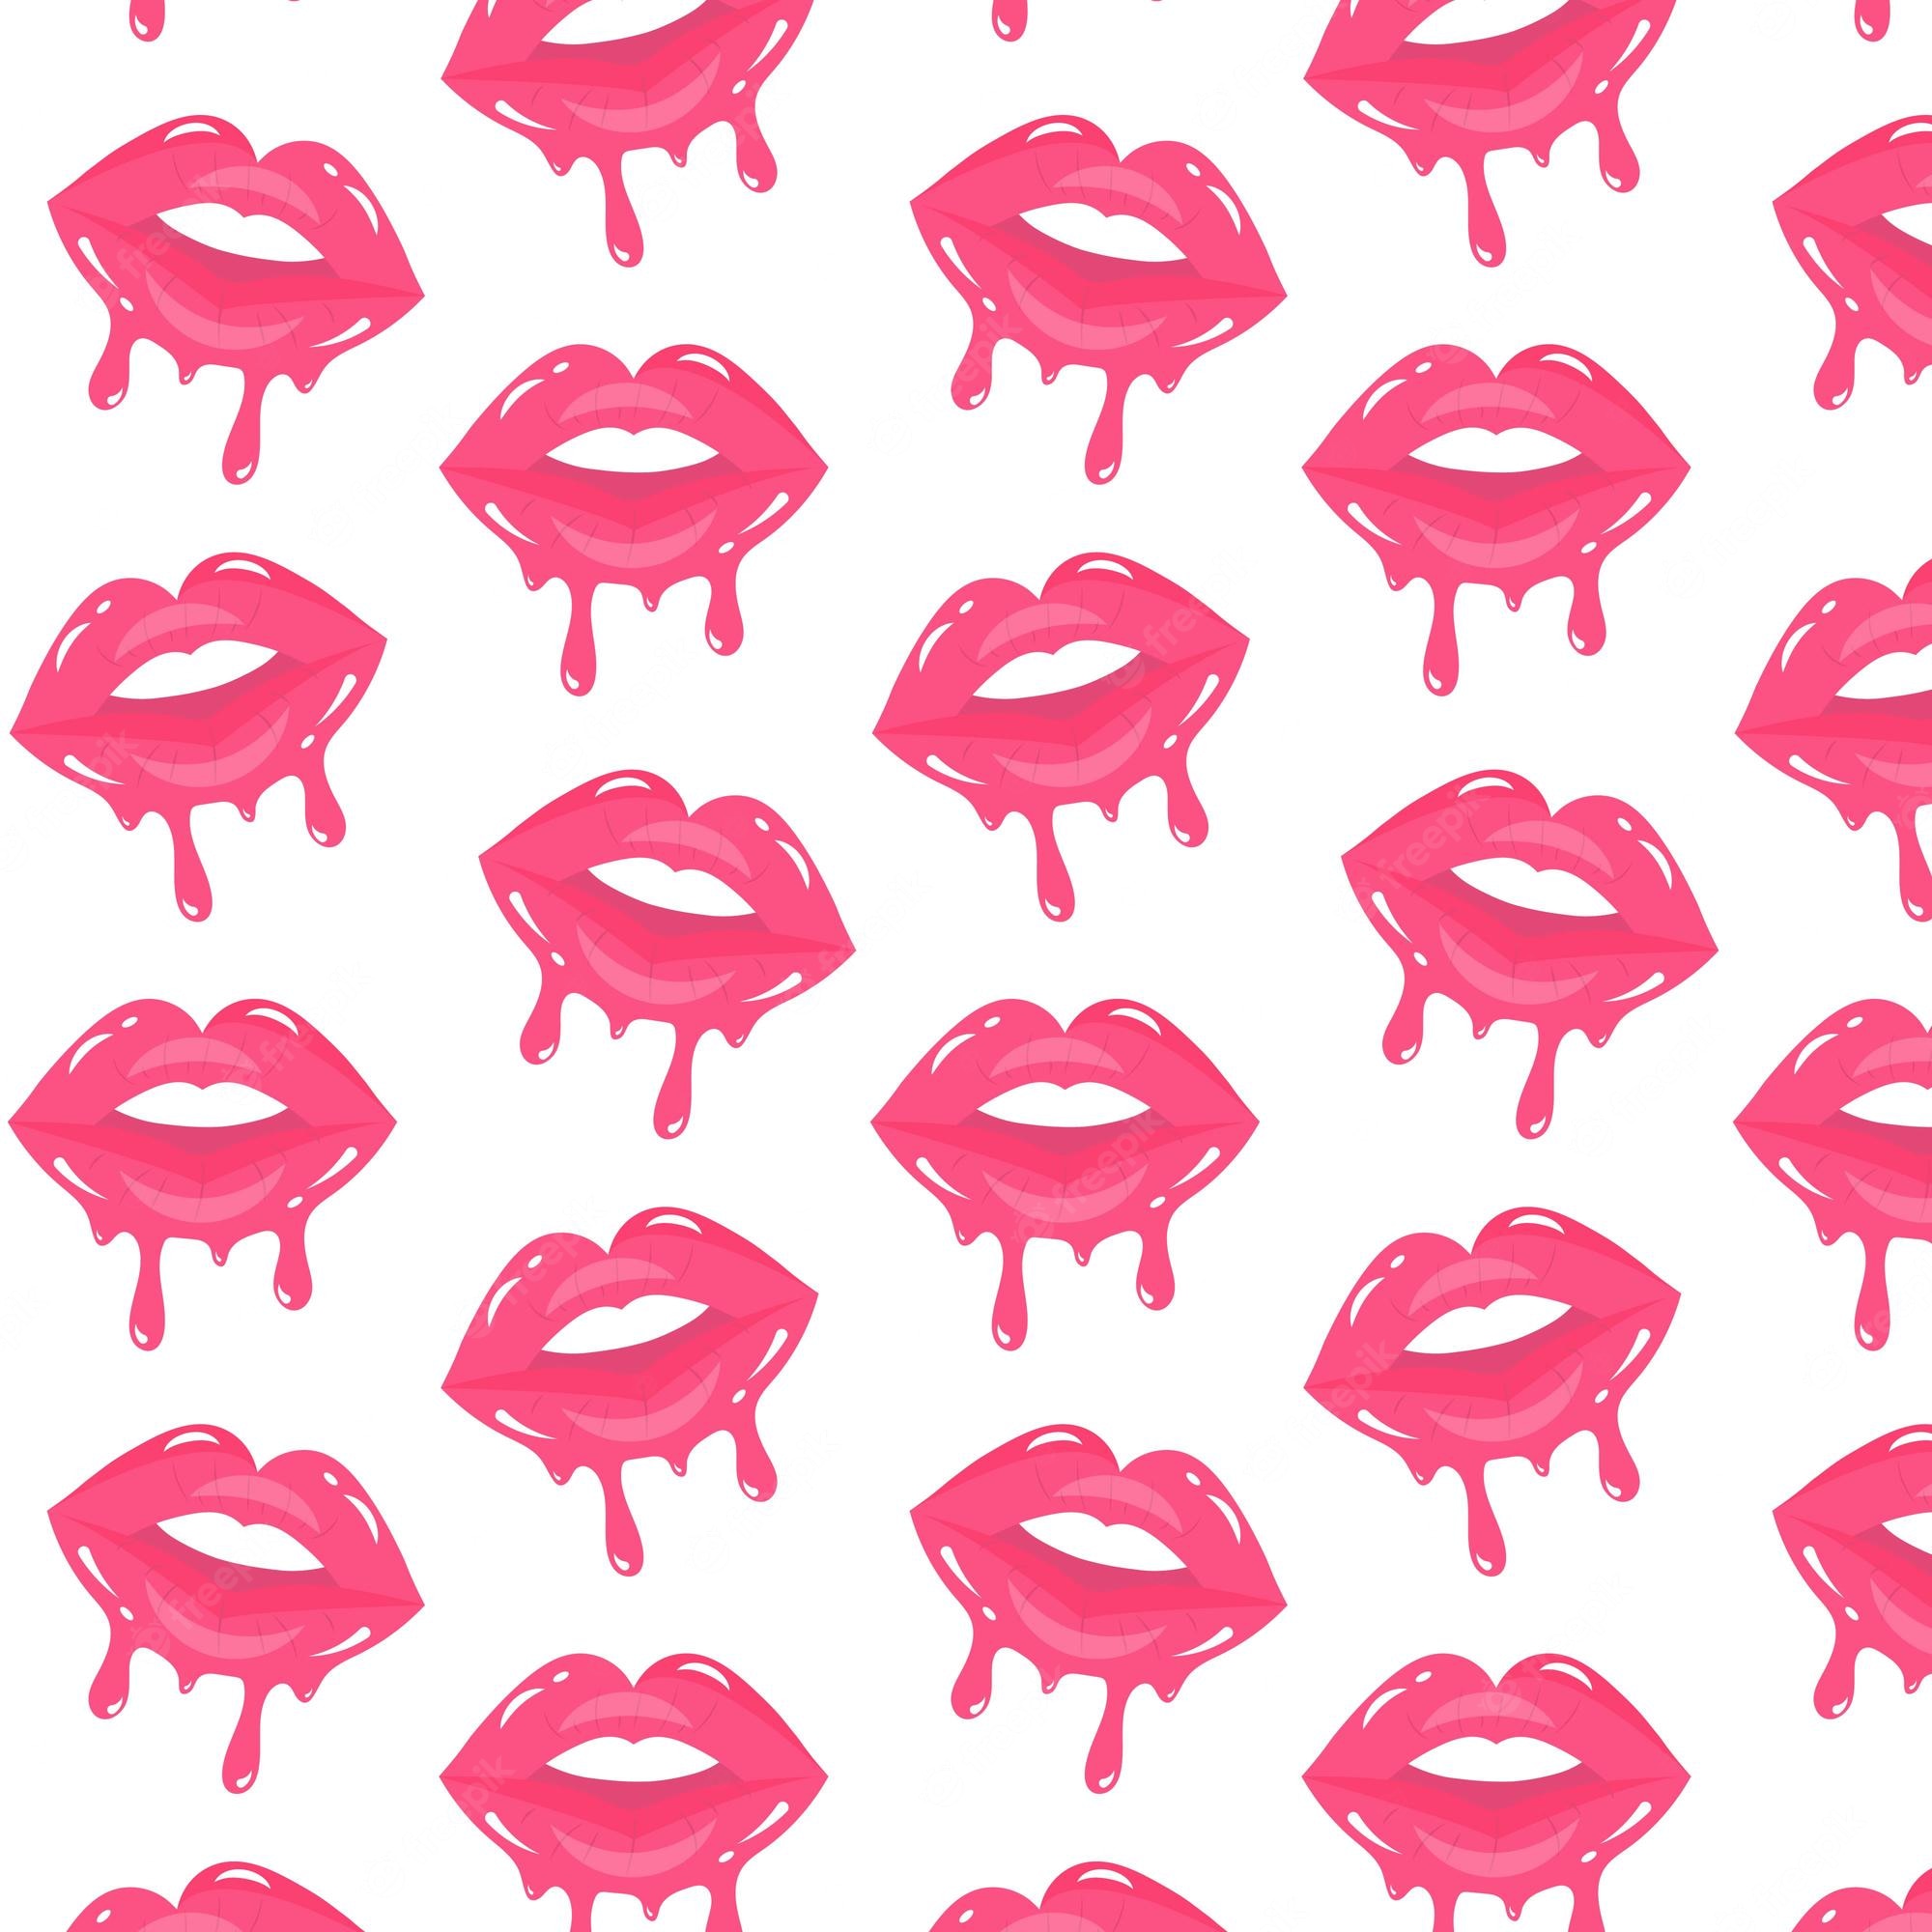 Dripping Lips Image. Free Vectors, & PSD